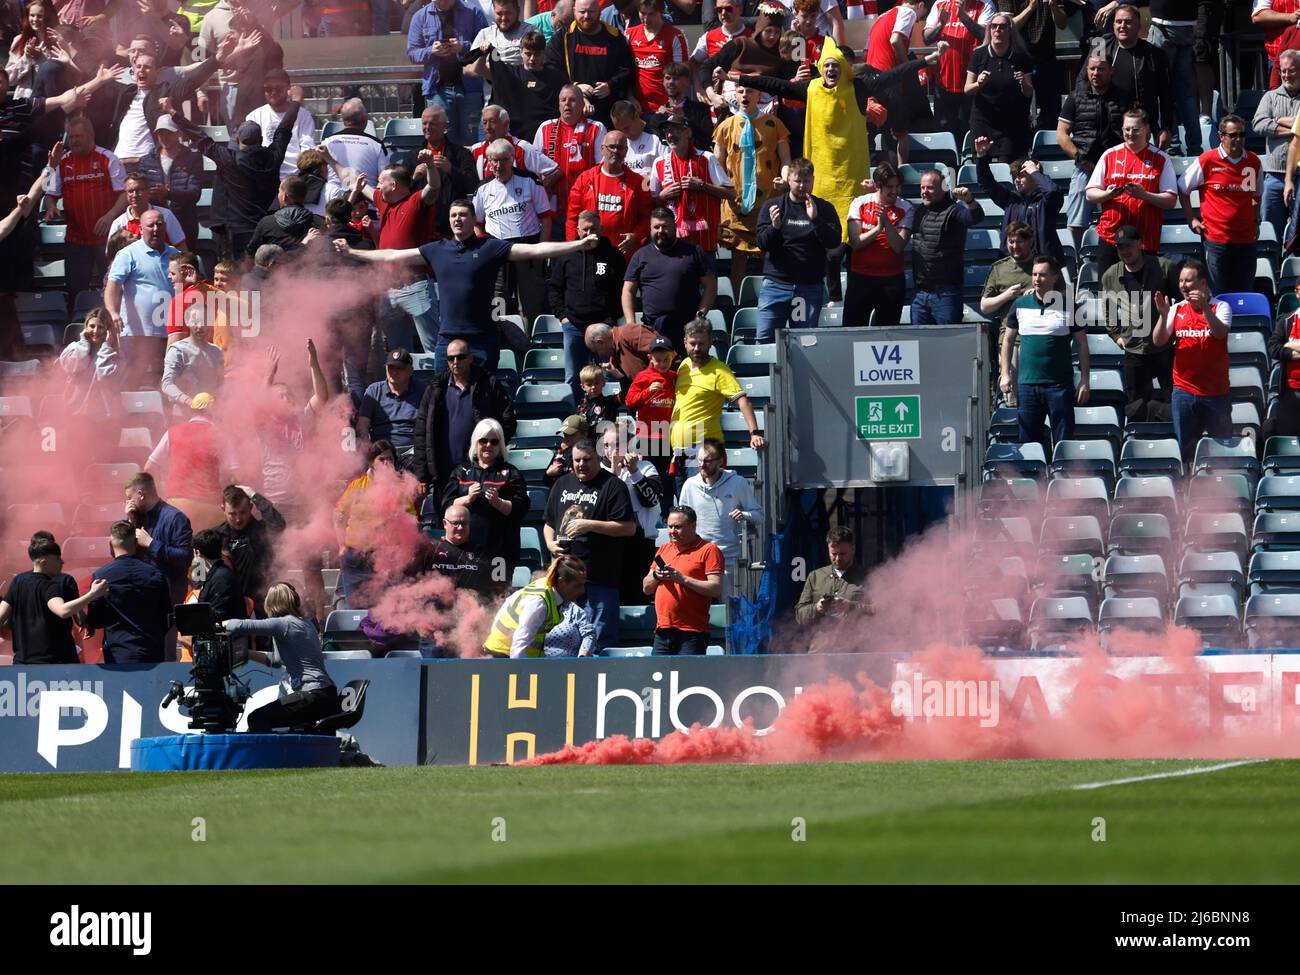 Trouble flares at Maribor as Spartak Moscow fans launch flare at